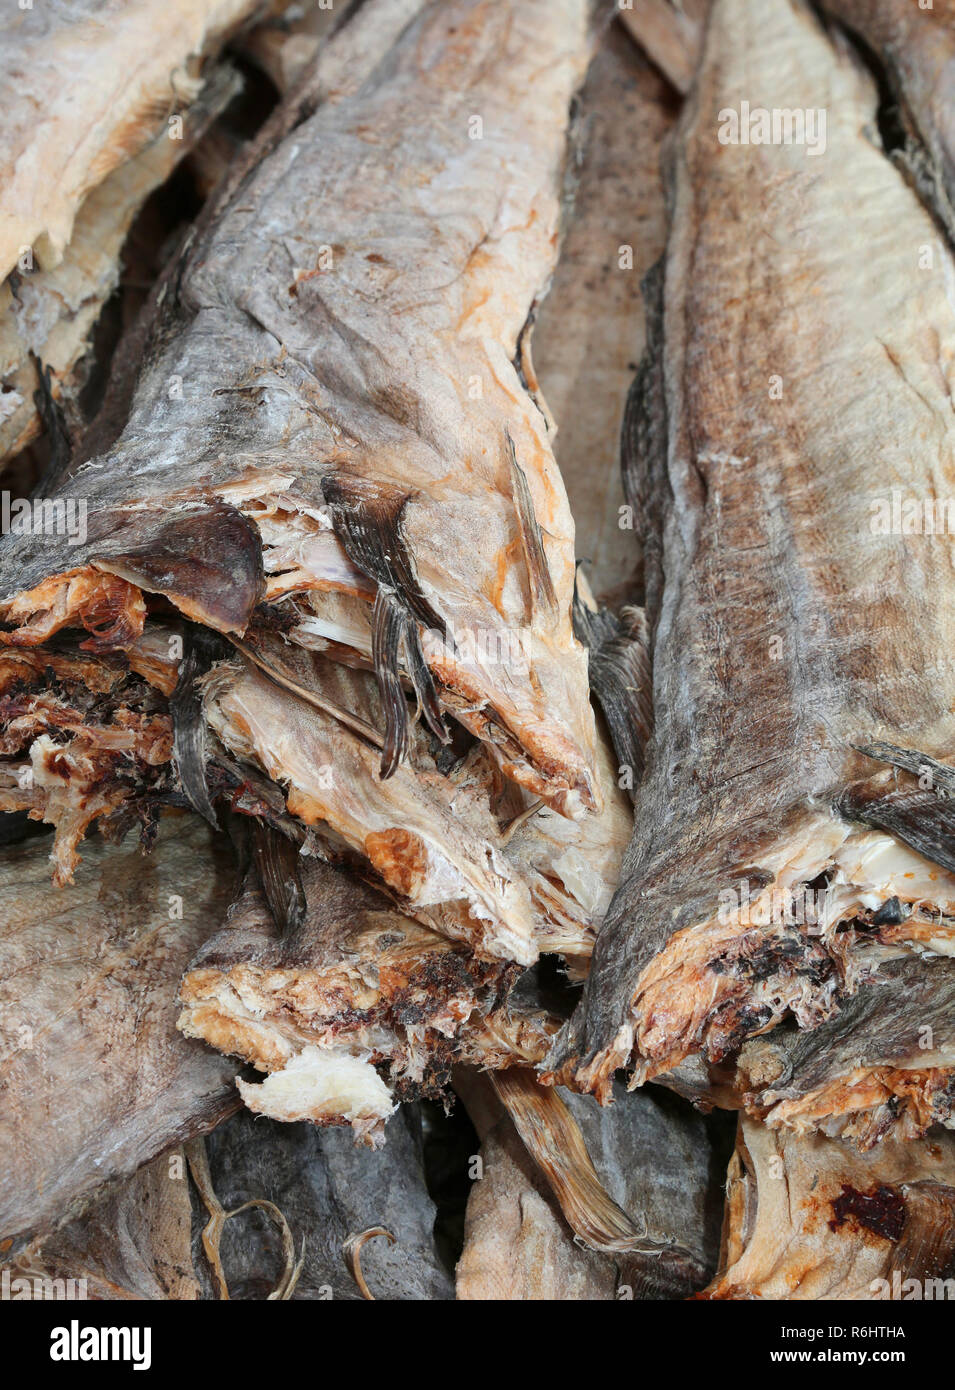 Smoked cod fish Dry for sale in the market Stock Photo